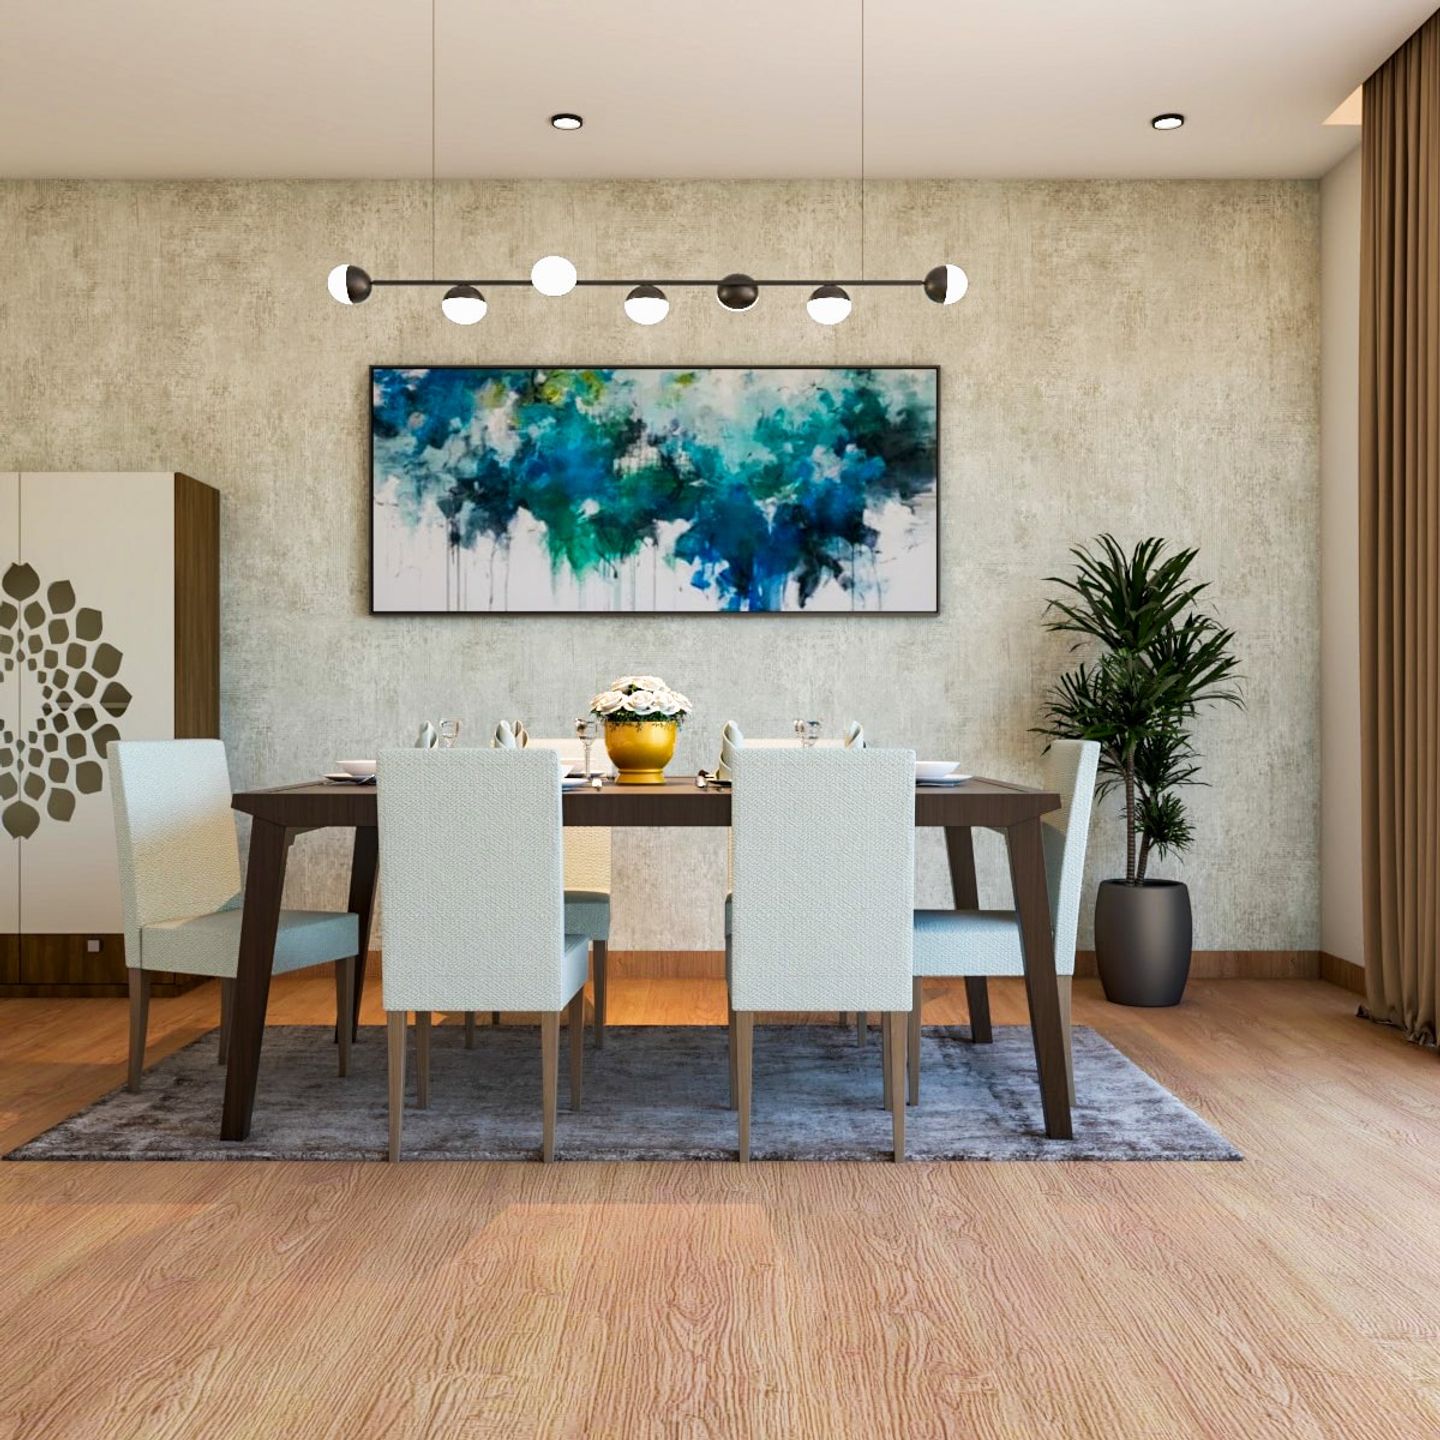 Dining Room Design With Textured Wallpaper - Livspace